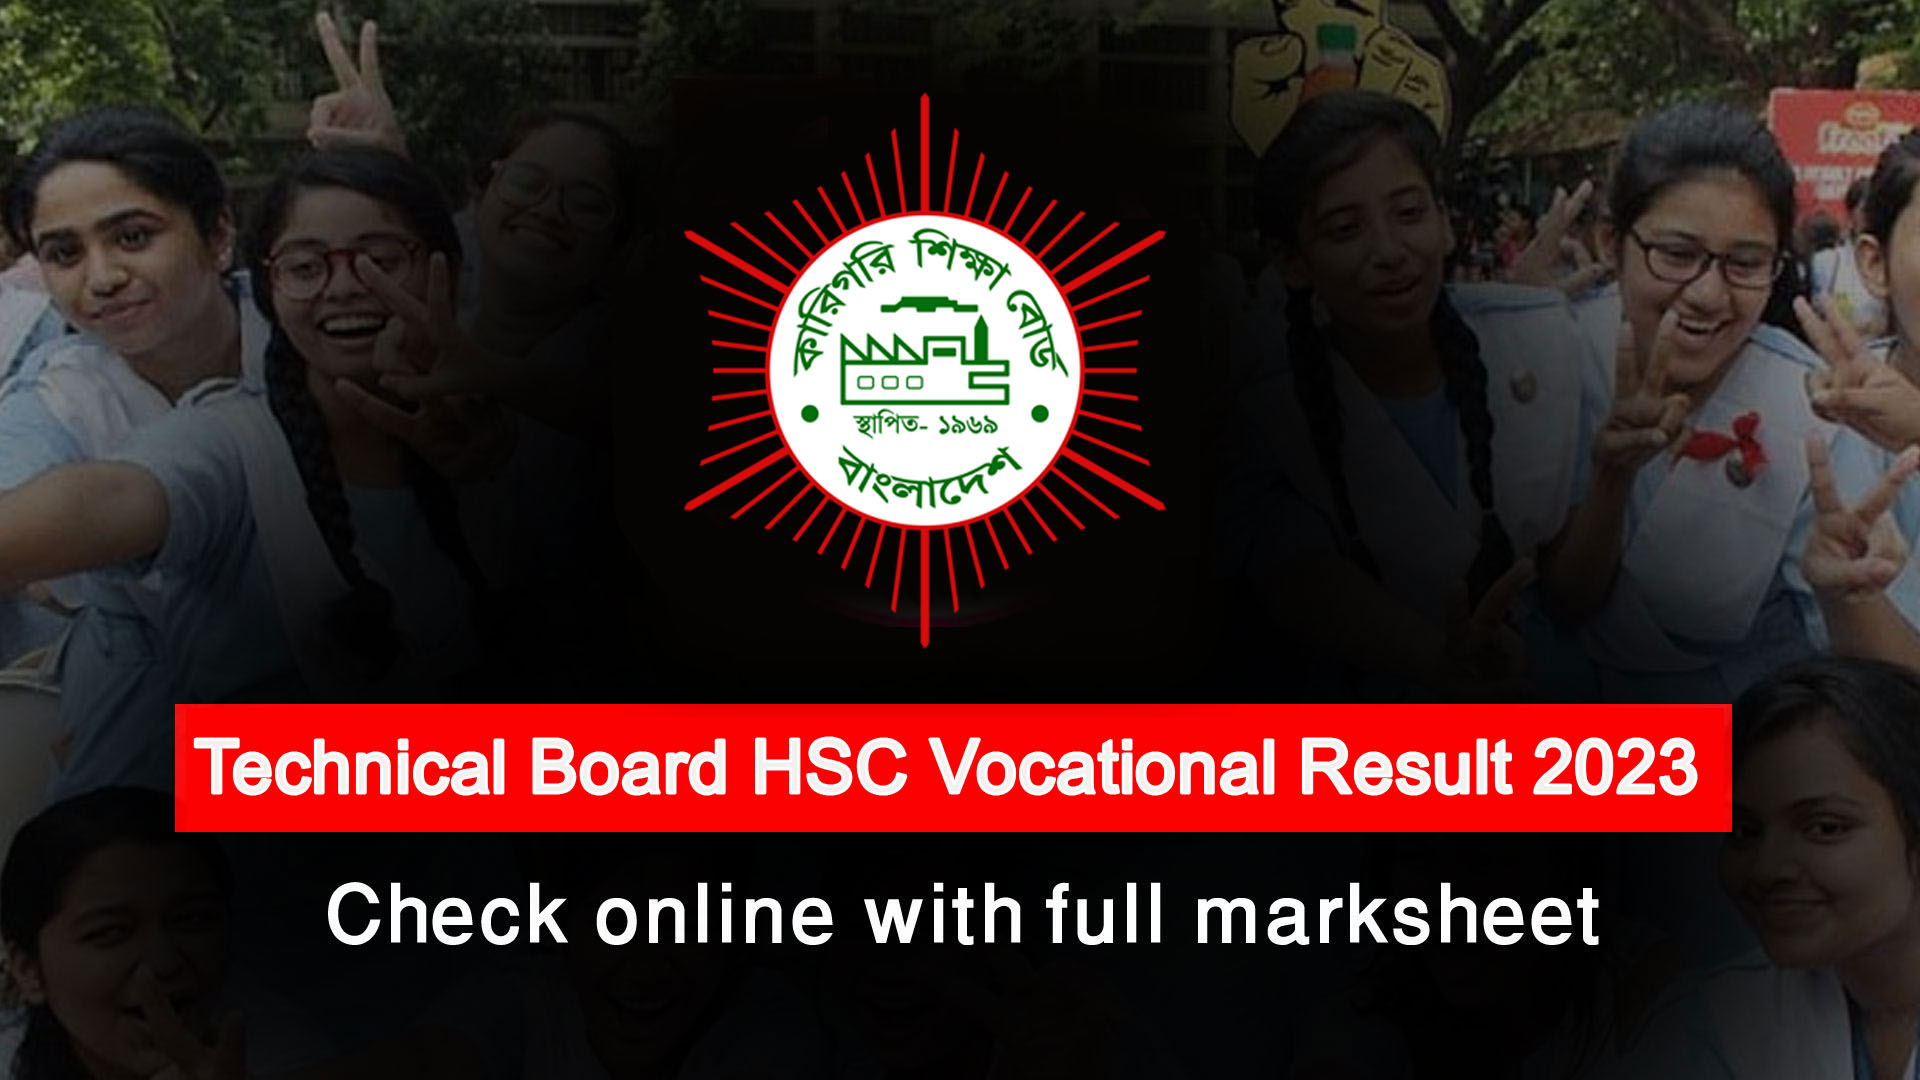 Technical Board HSC Vocational Result 2023